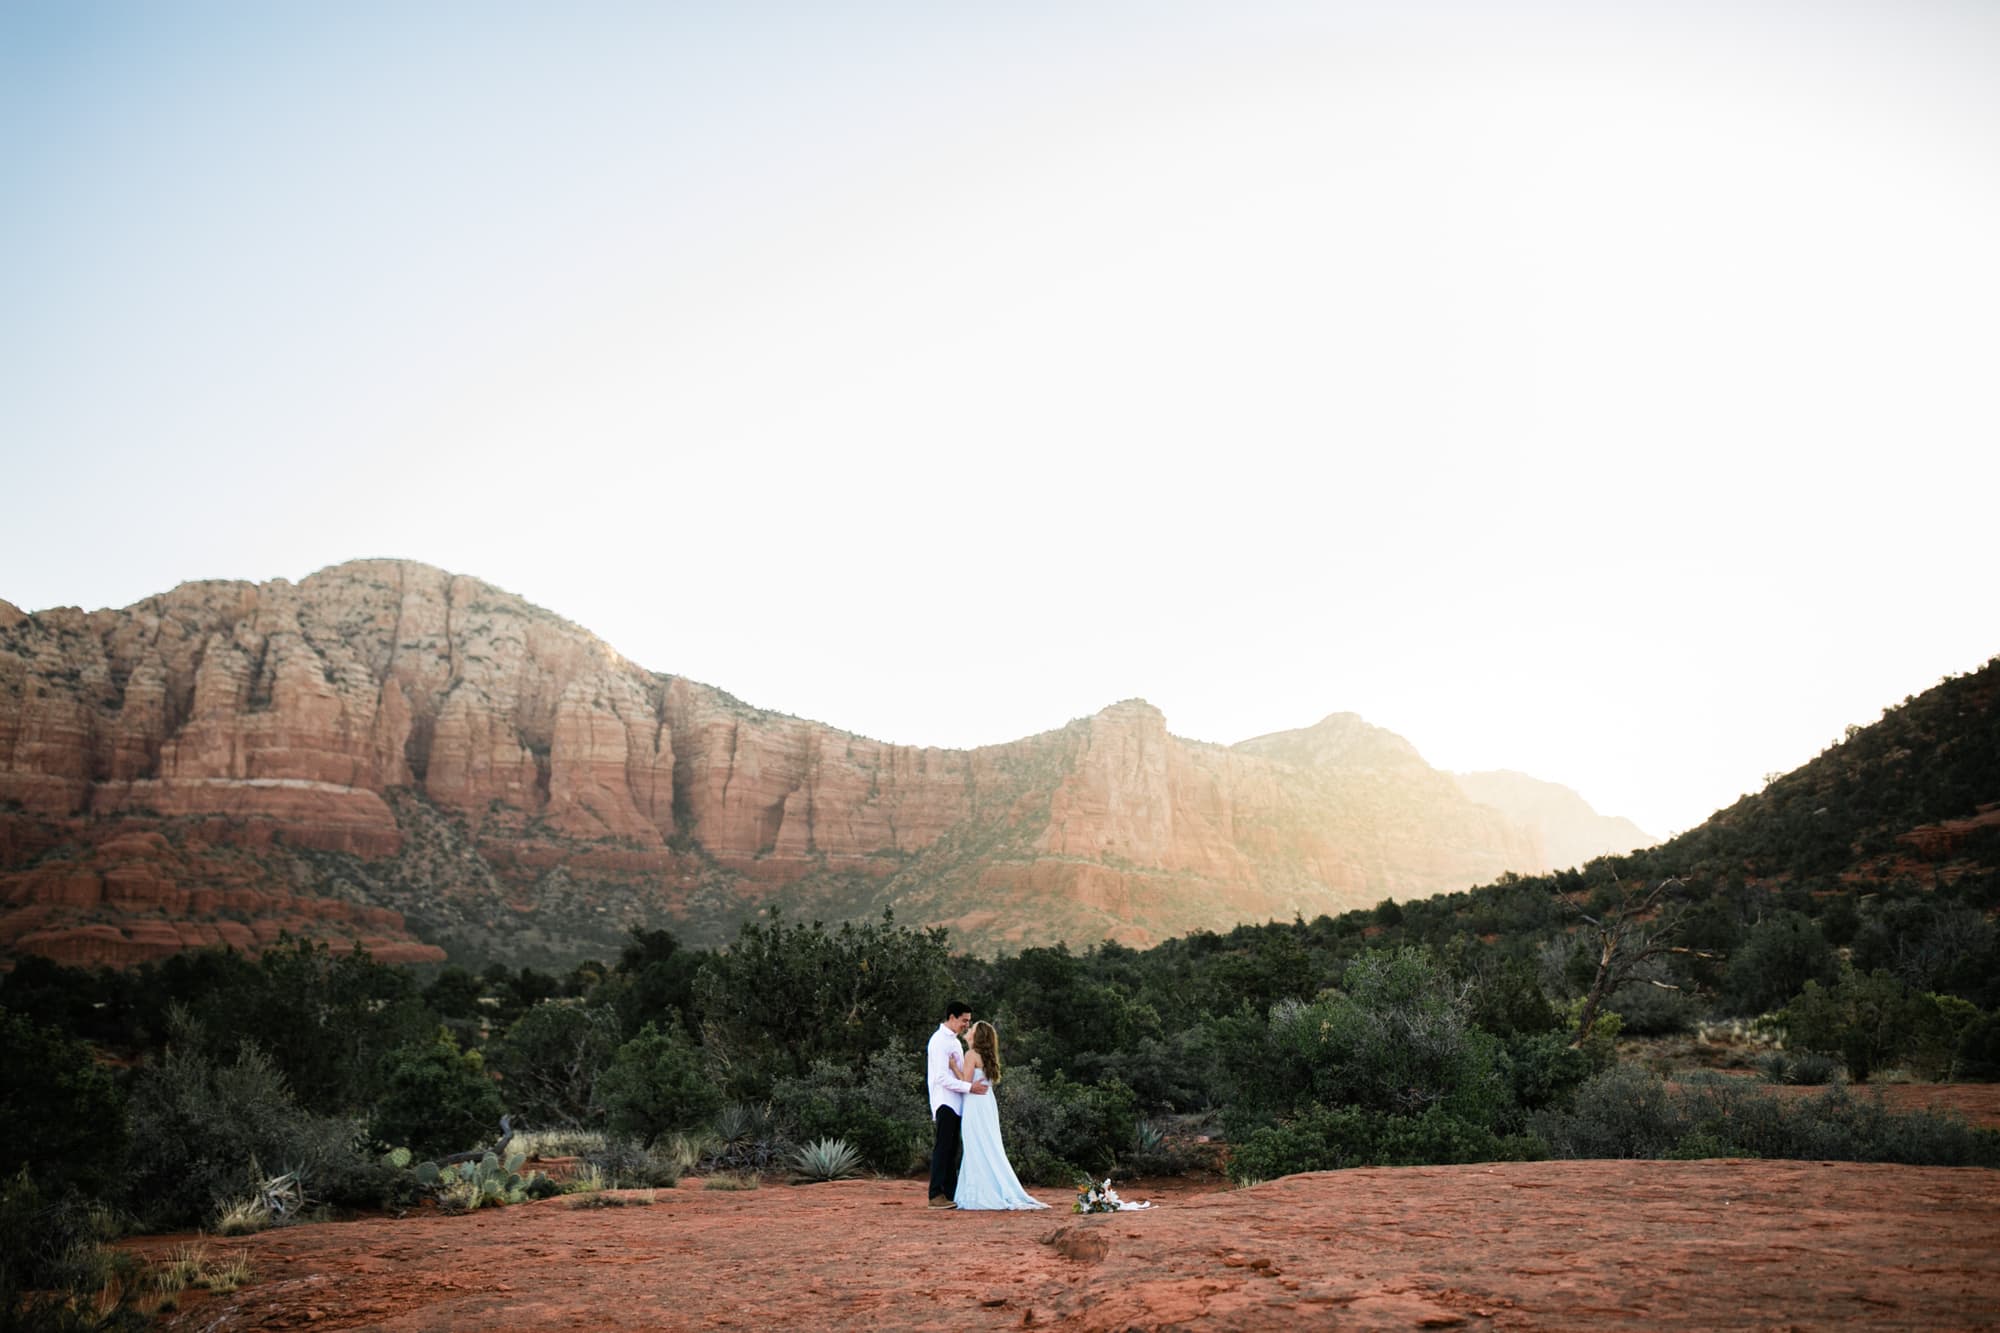 The couple appear tiny as the sun rises over the red Sedona mountains.